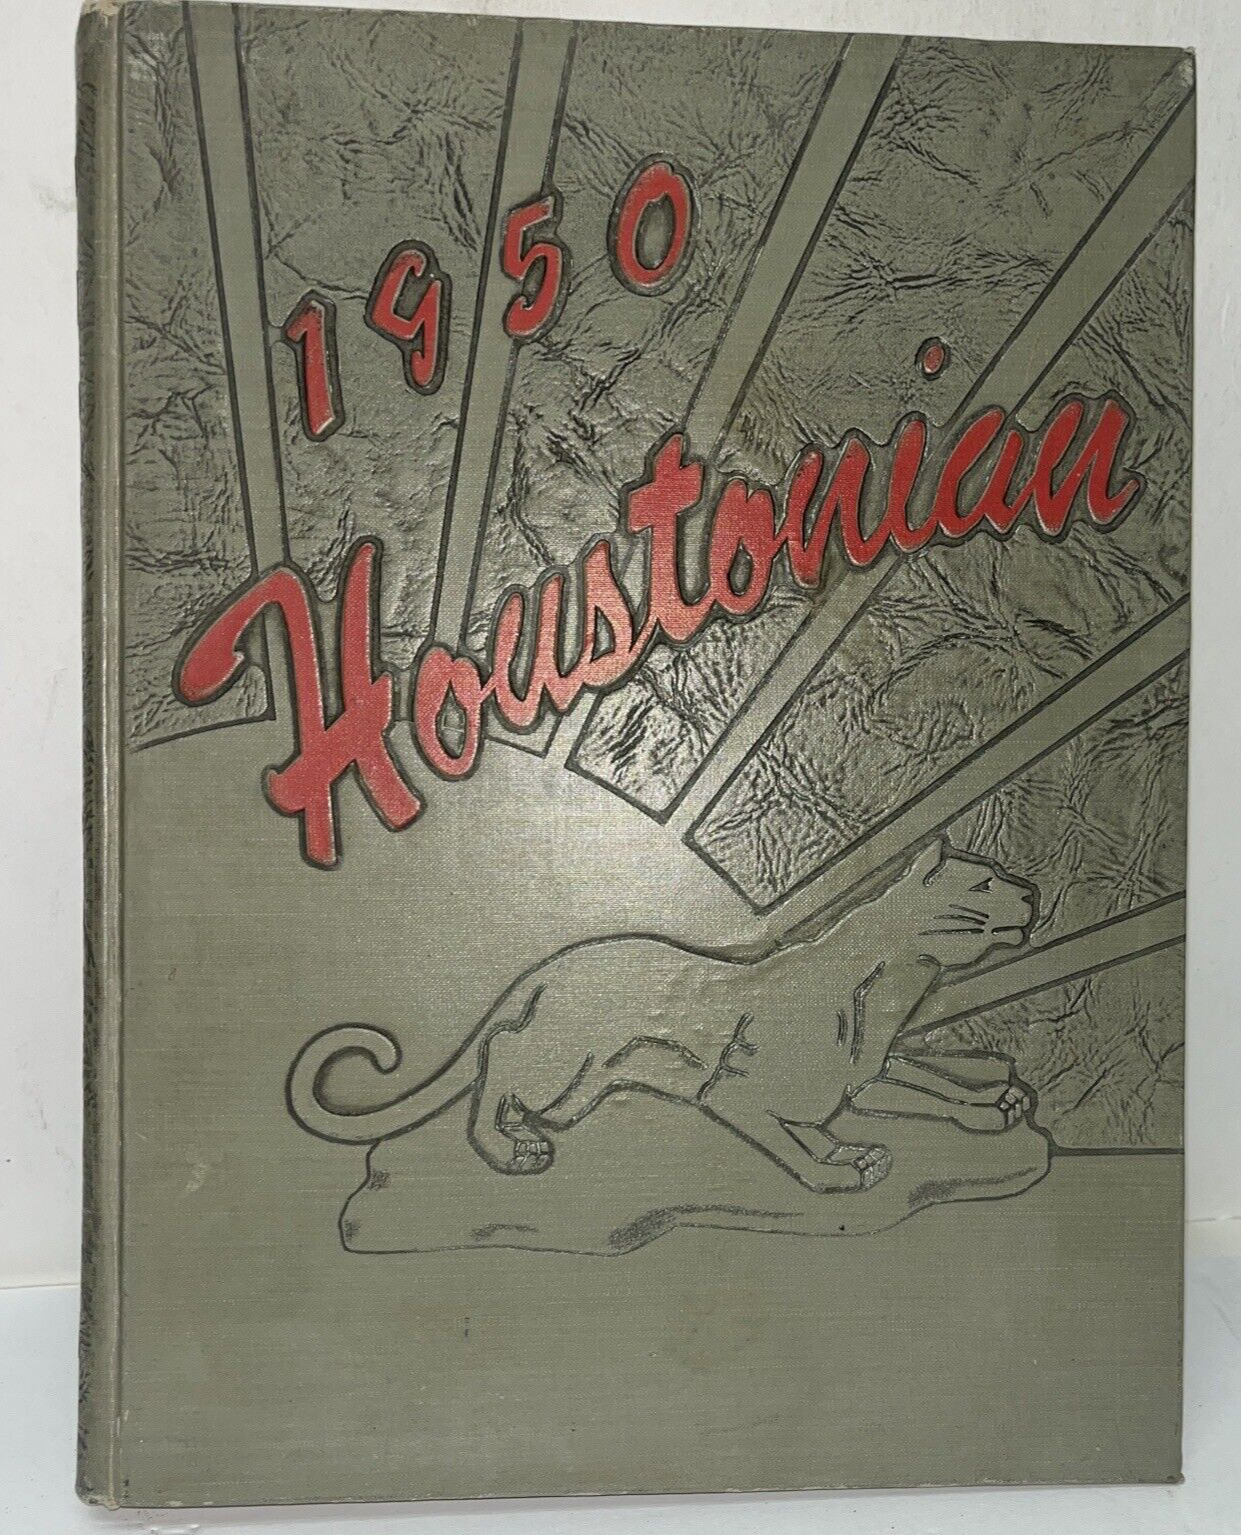 1950 University of Houston Texas Houstonian Yearbook College Sports Ads Clubs